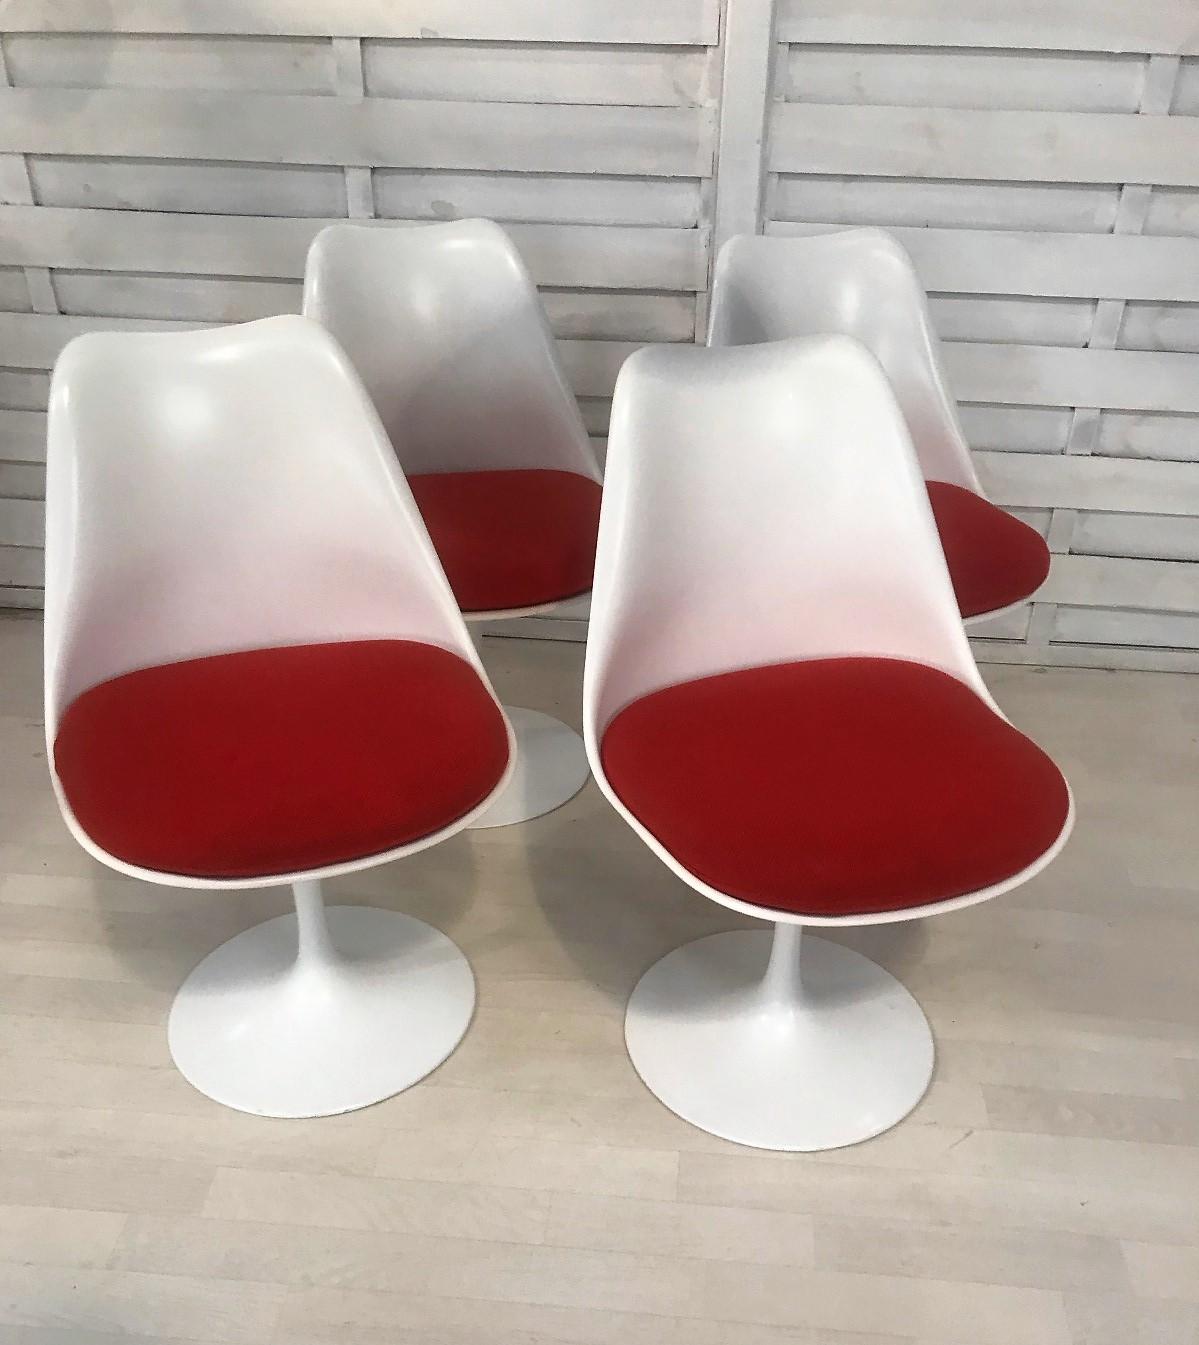 Eero Saarinen (1910-1961) & Knoll International

Suite of 4 Tulip model chairs
White lacquered fiberglass shell, base in cast aluminum covered with white Rilsan. Non swivel.
Dimensions: 31.89 x 20.08 x 17.33 in

Suite de 4 chaises modèle